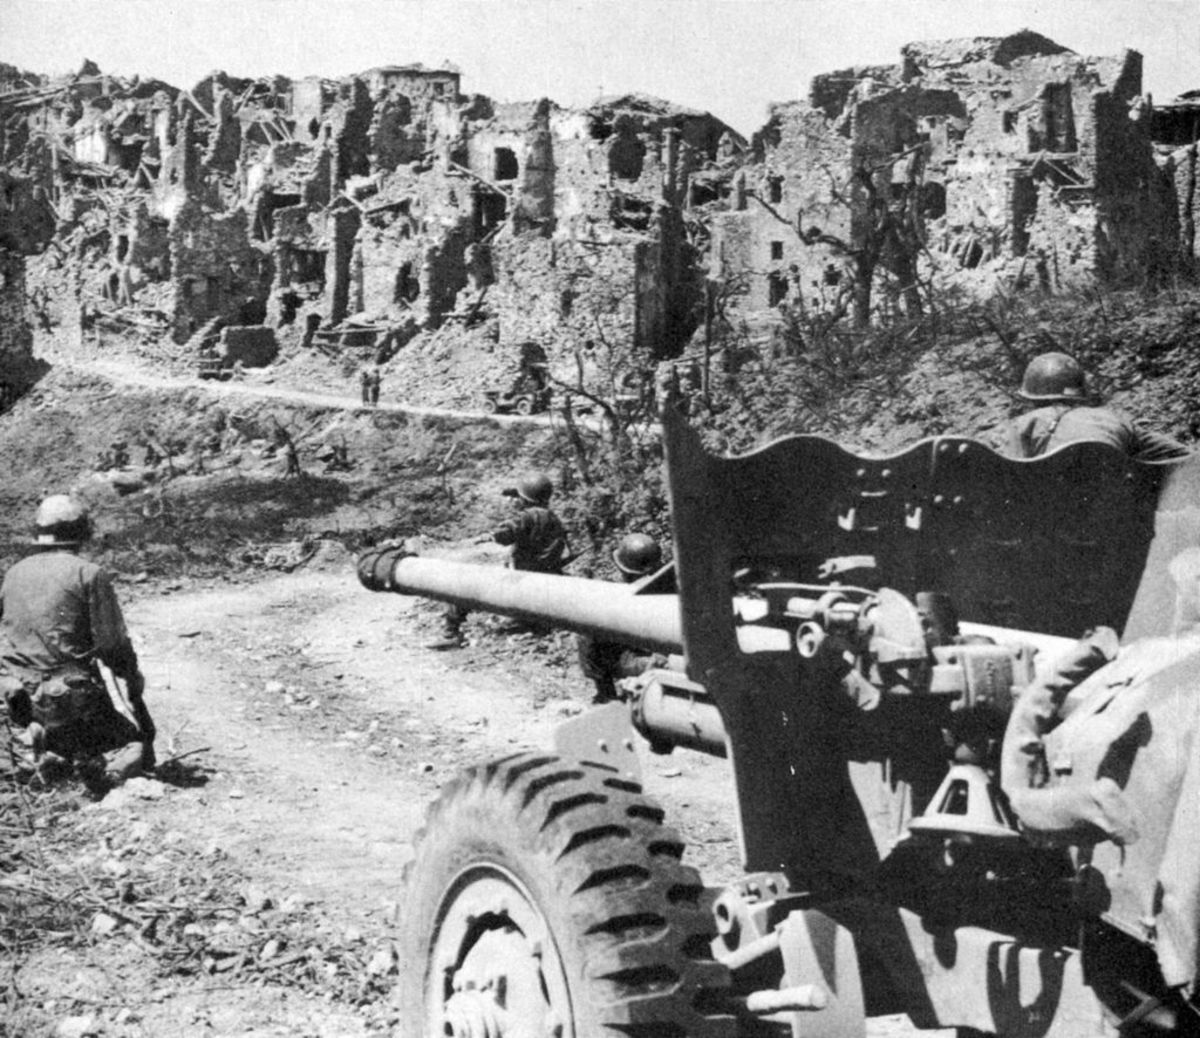 The infamous Battle of Monte Cassino